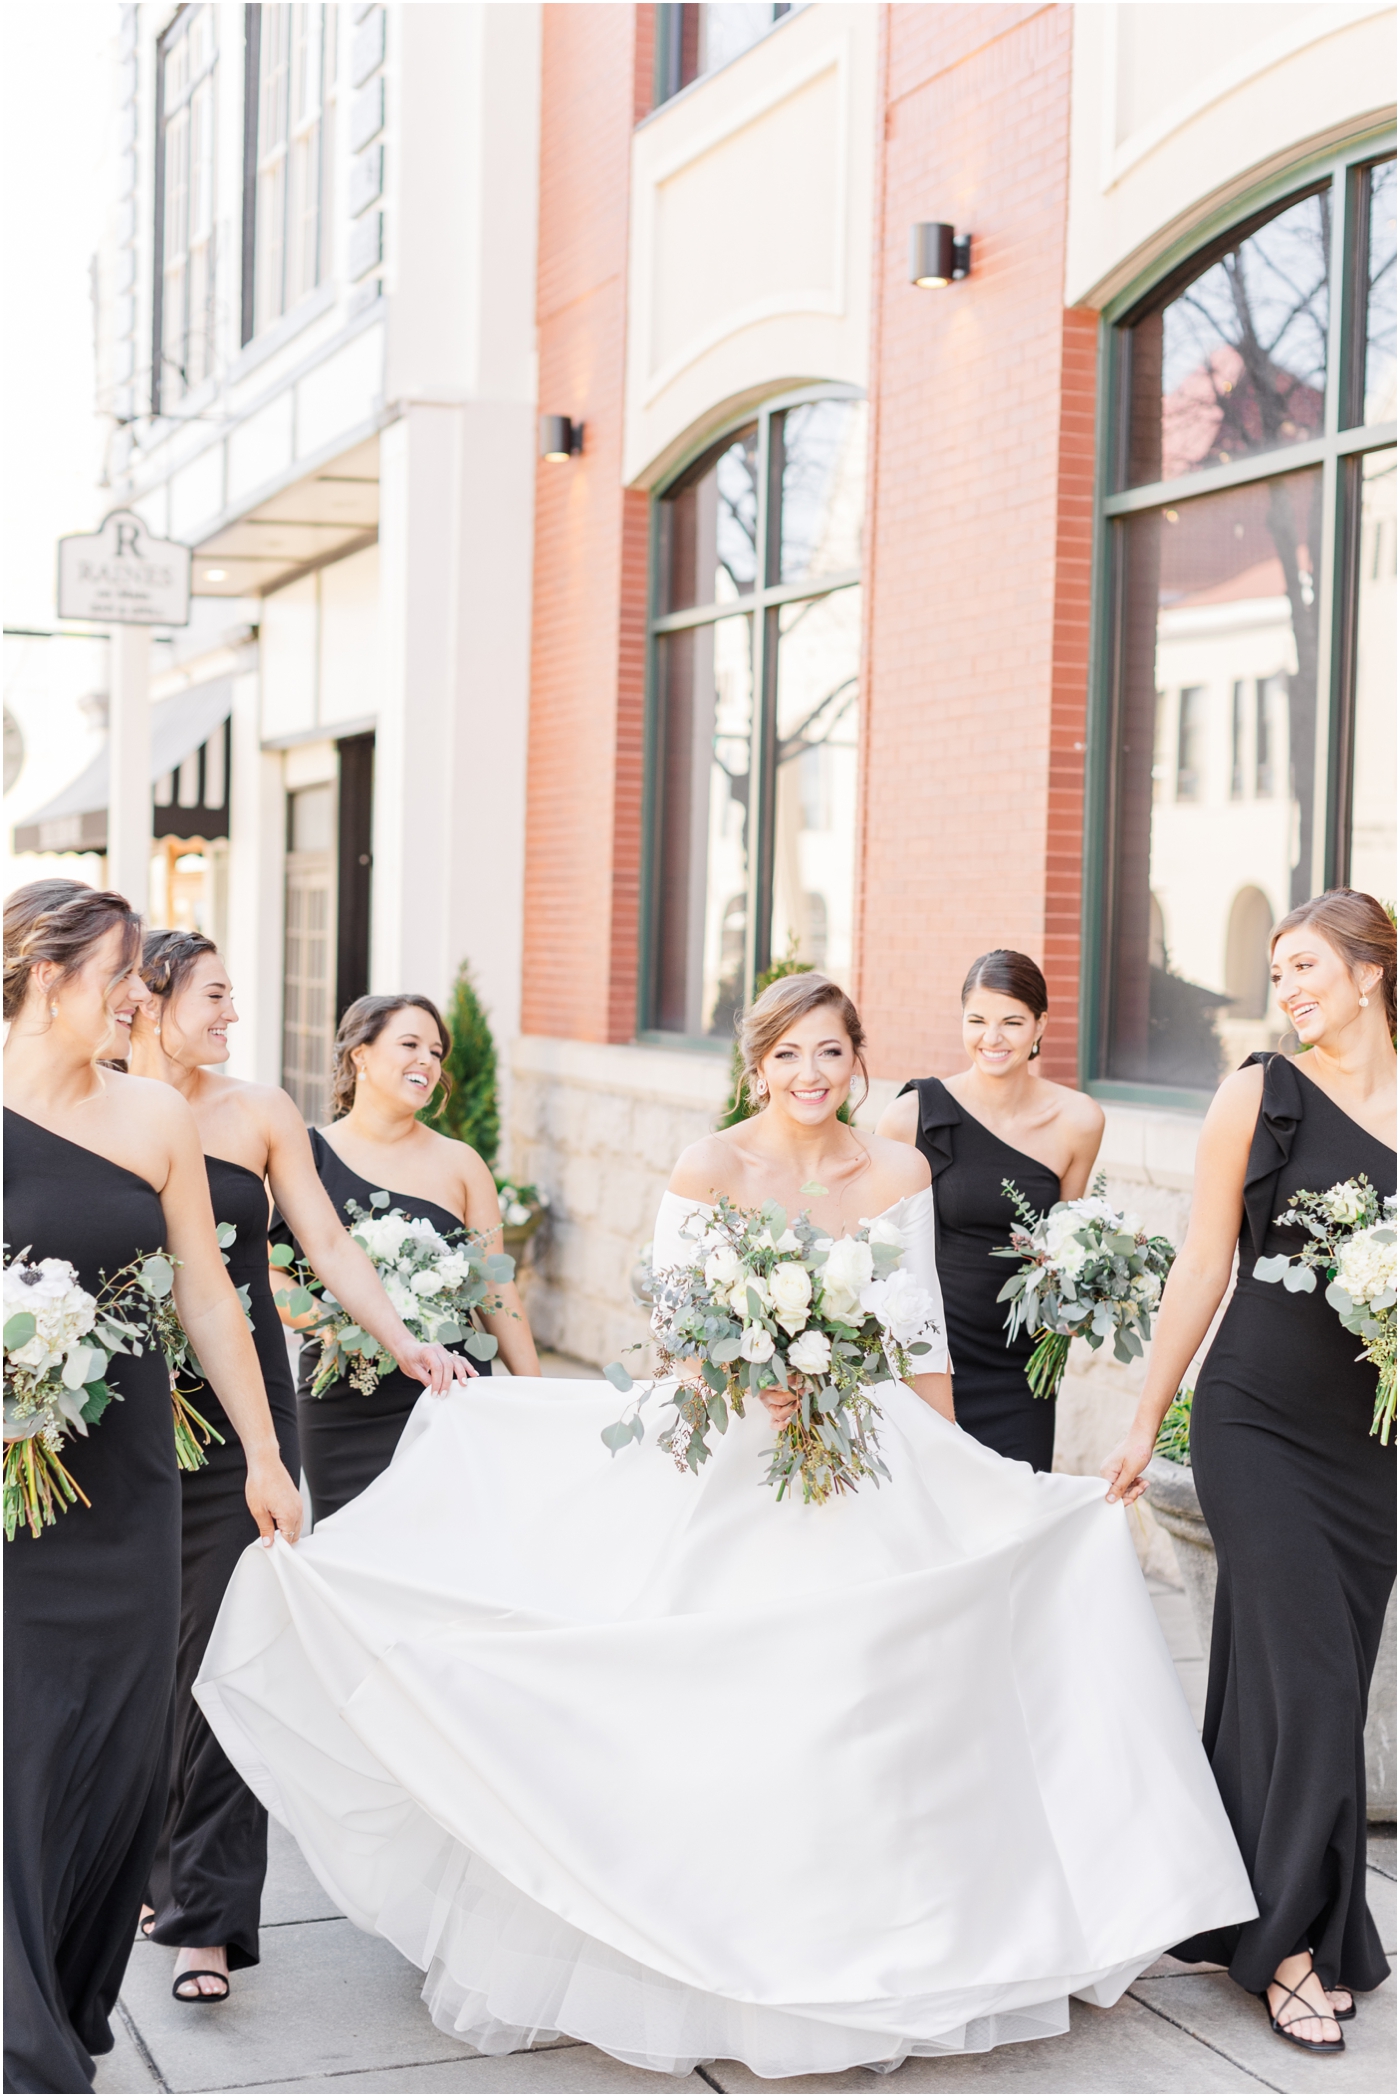 Bleckley Station Wedding in Anderson SC Wedding Photographer